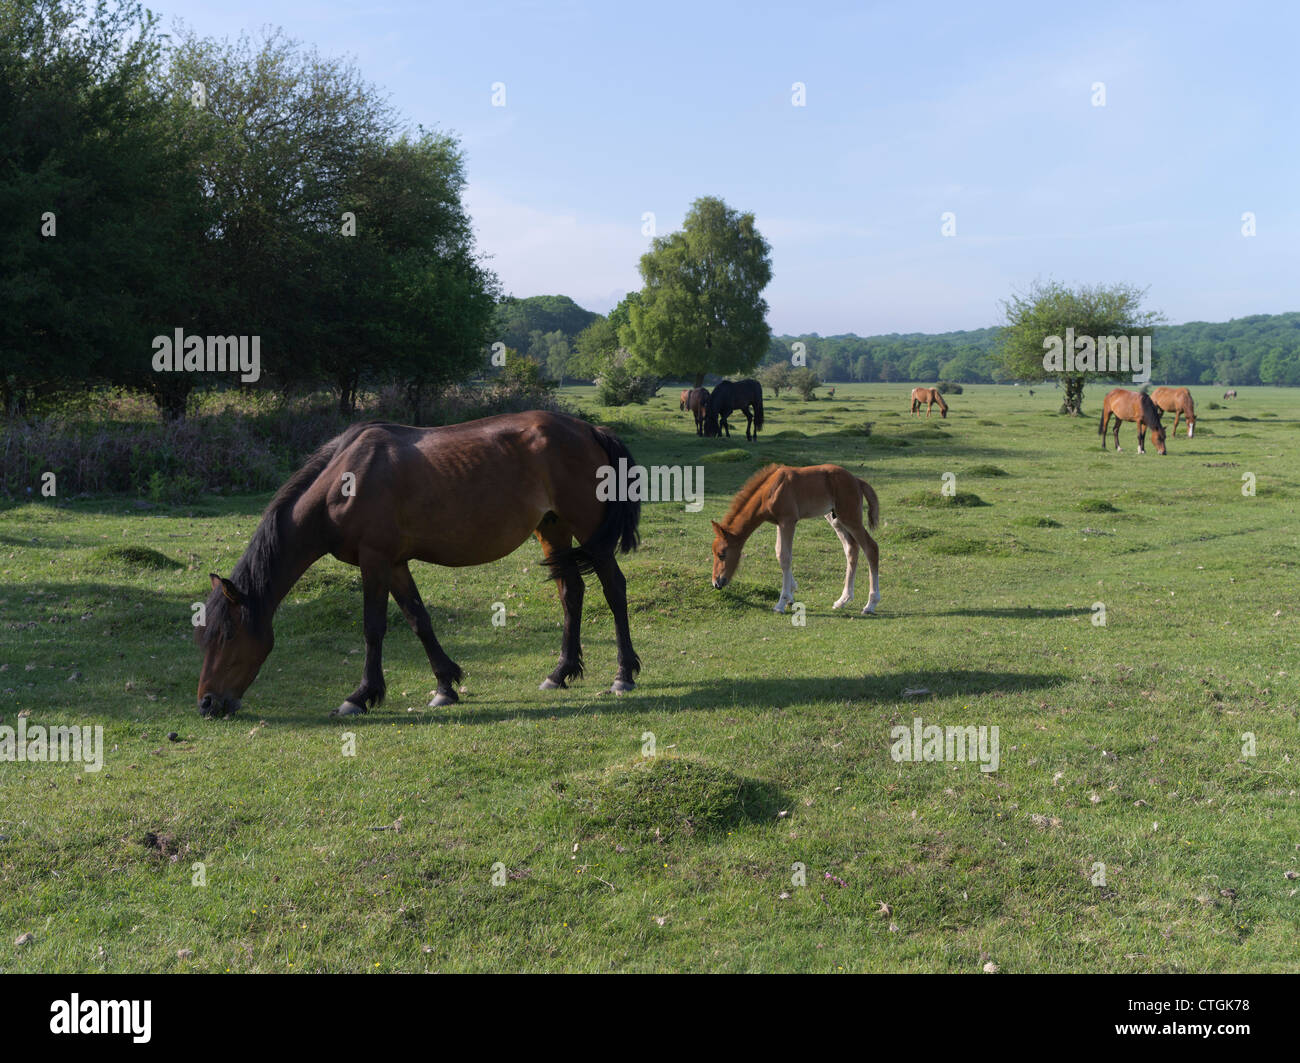 dh National Park NEW FOREST HAMPSHIRE New Forest ponies cavallo volpe pascolo su cavalli terra comune inghilterra pony field foals uk Foto Stock